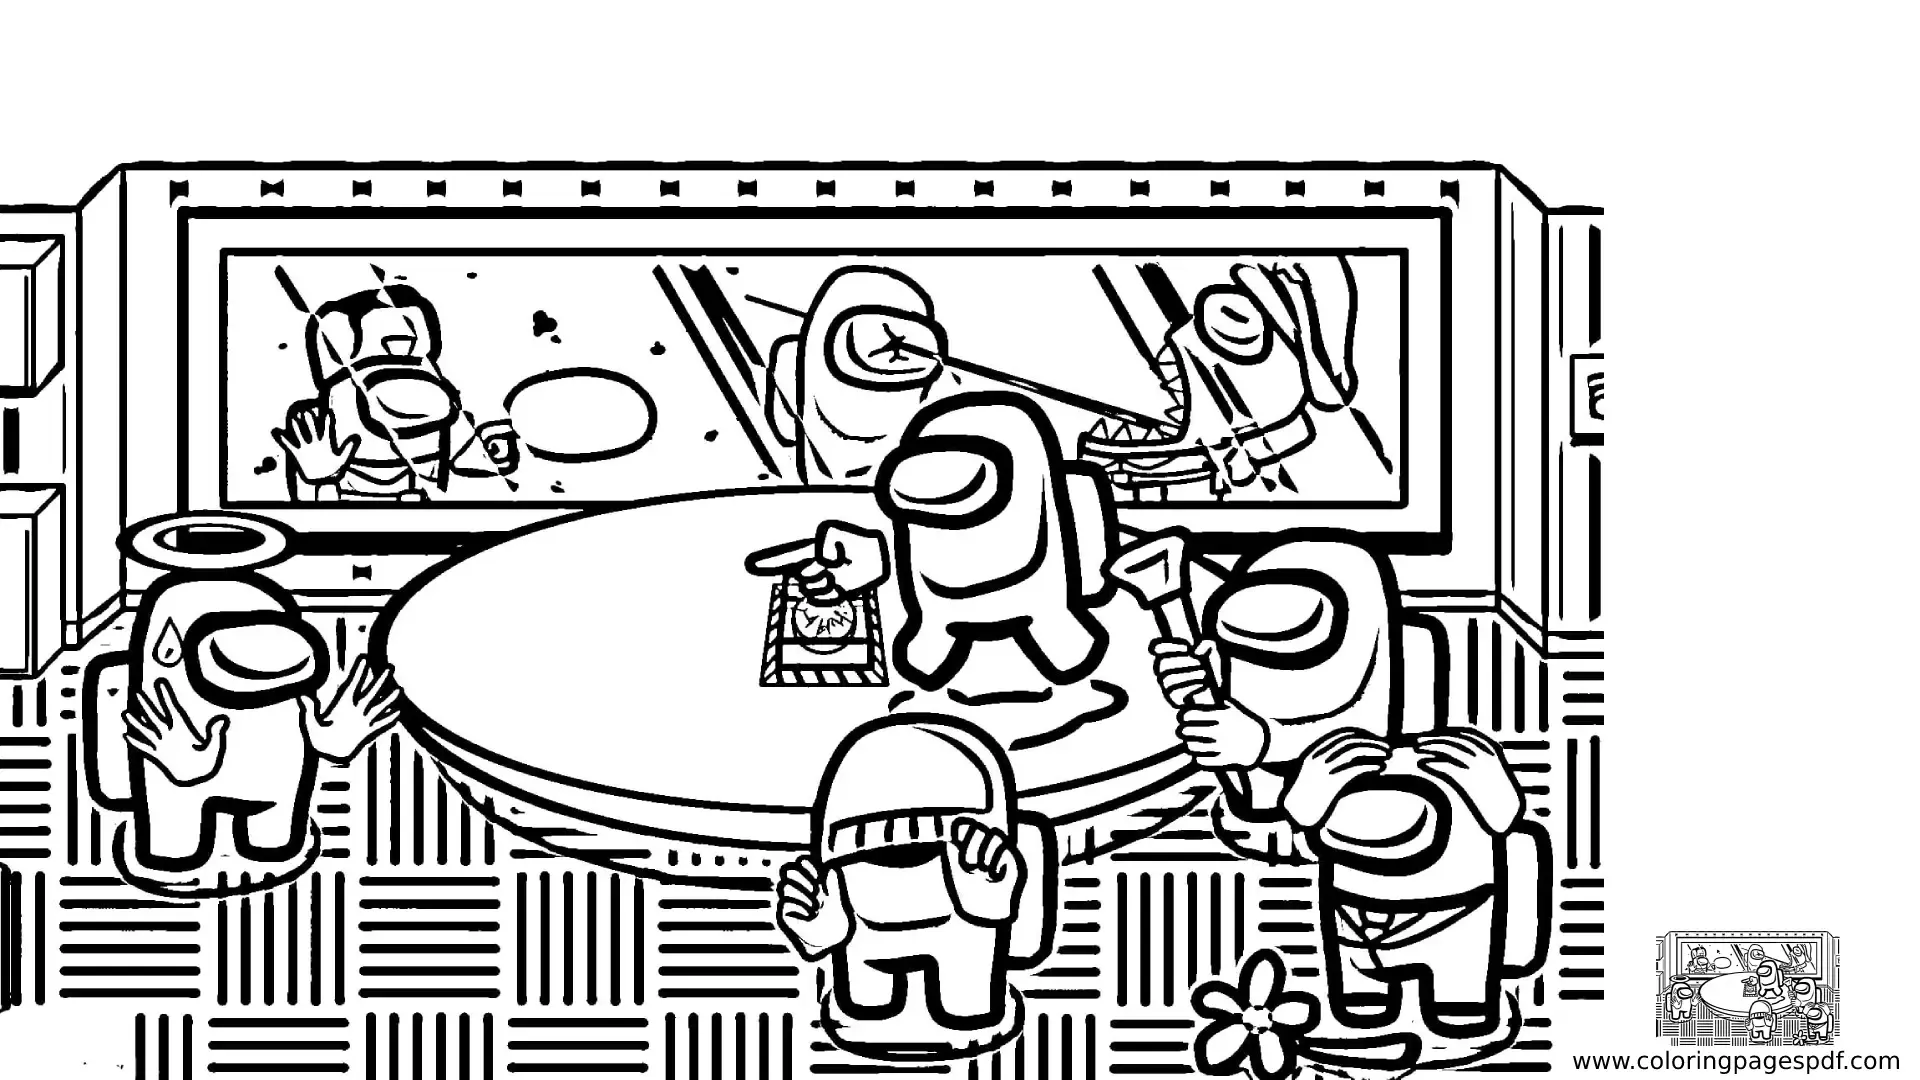 Coloring Page Of A Wrong Suspicion In Meeting